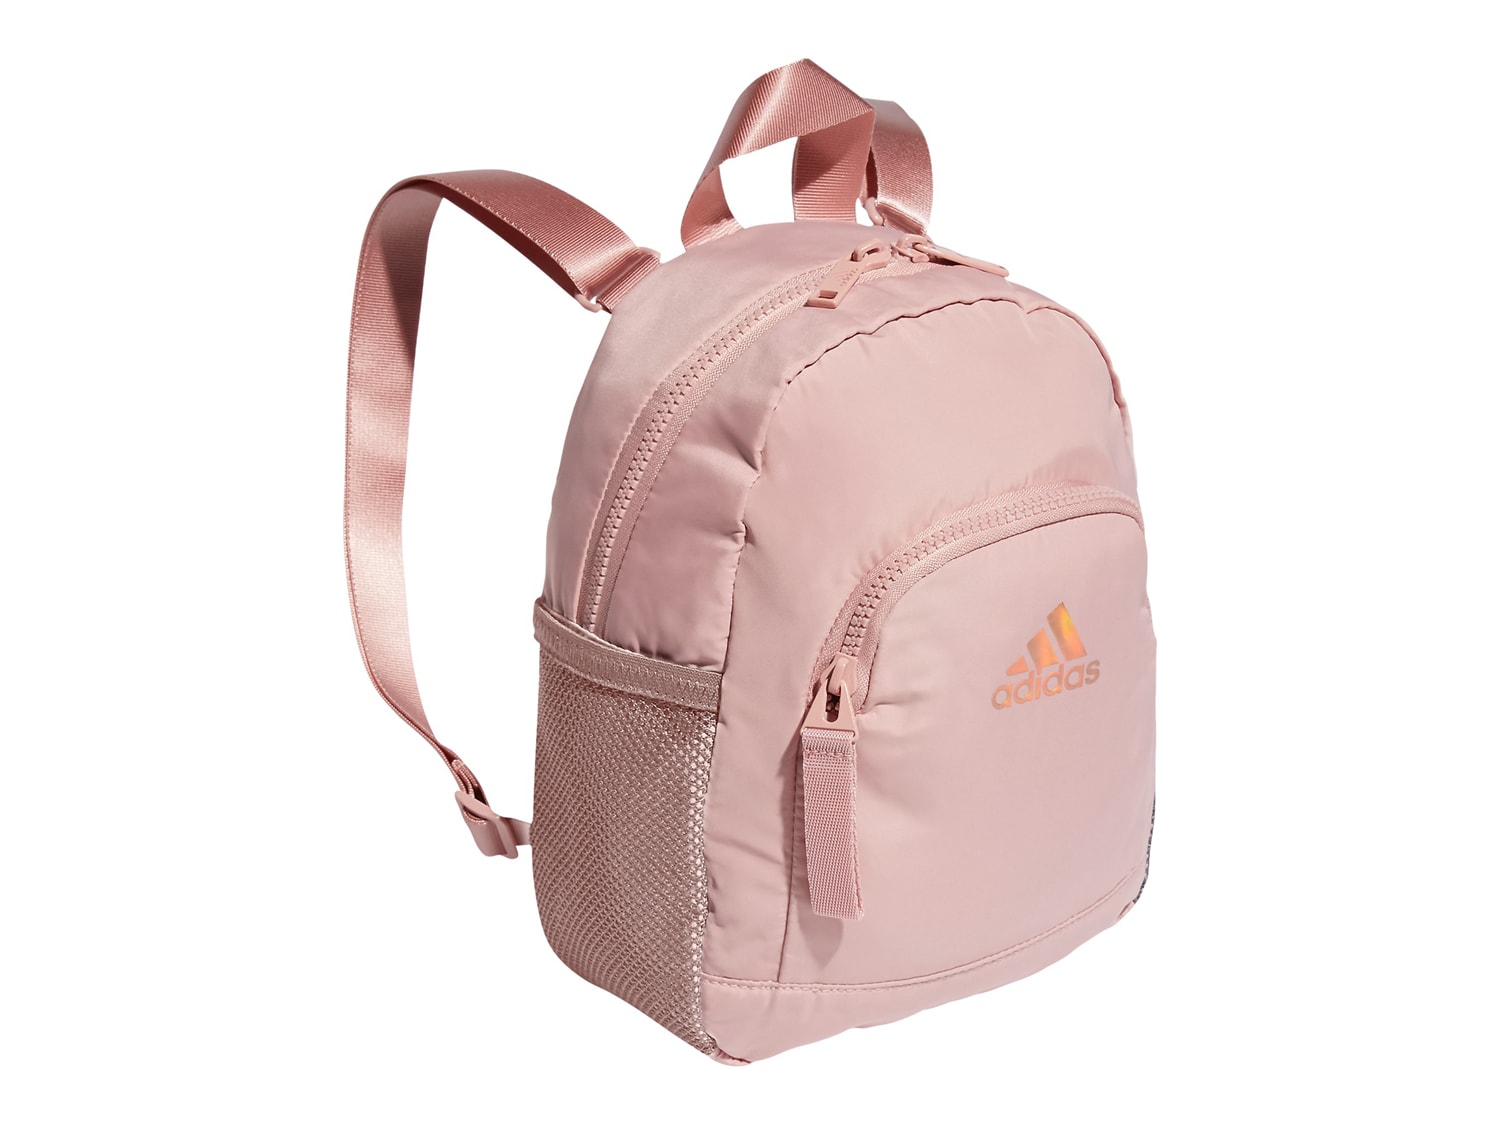 Linear Mini Backpack Free Shipping | DSW